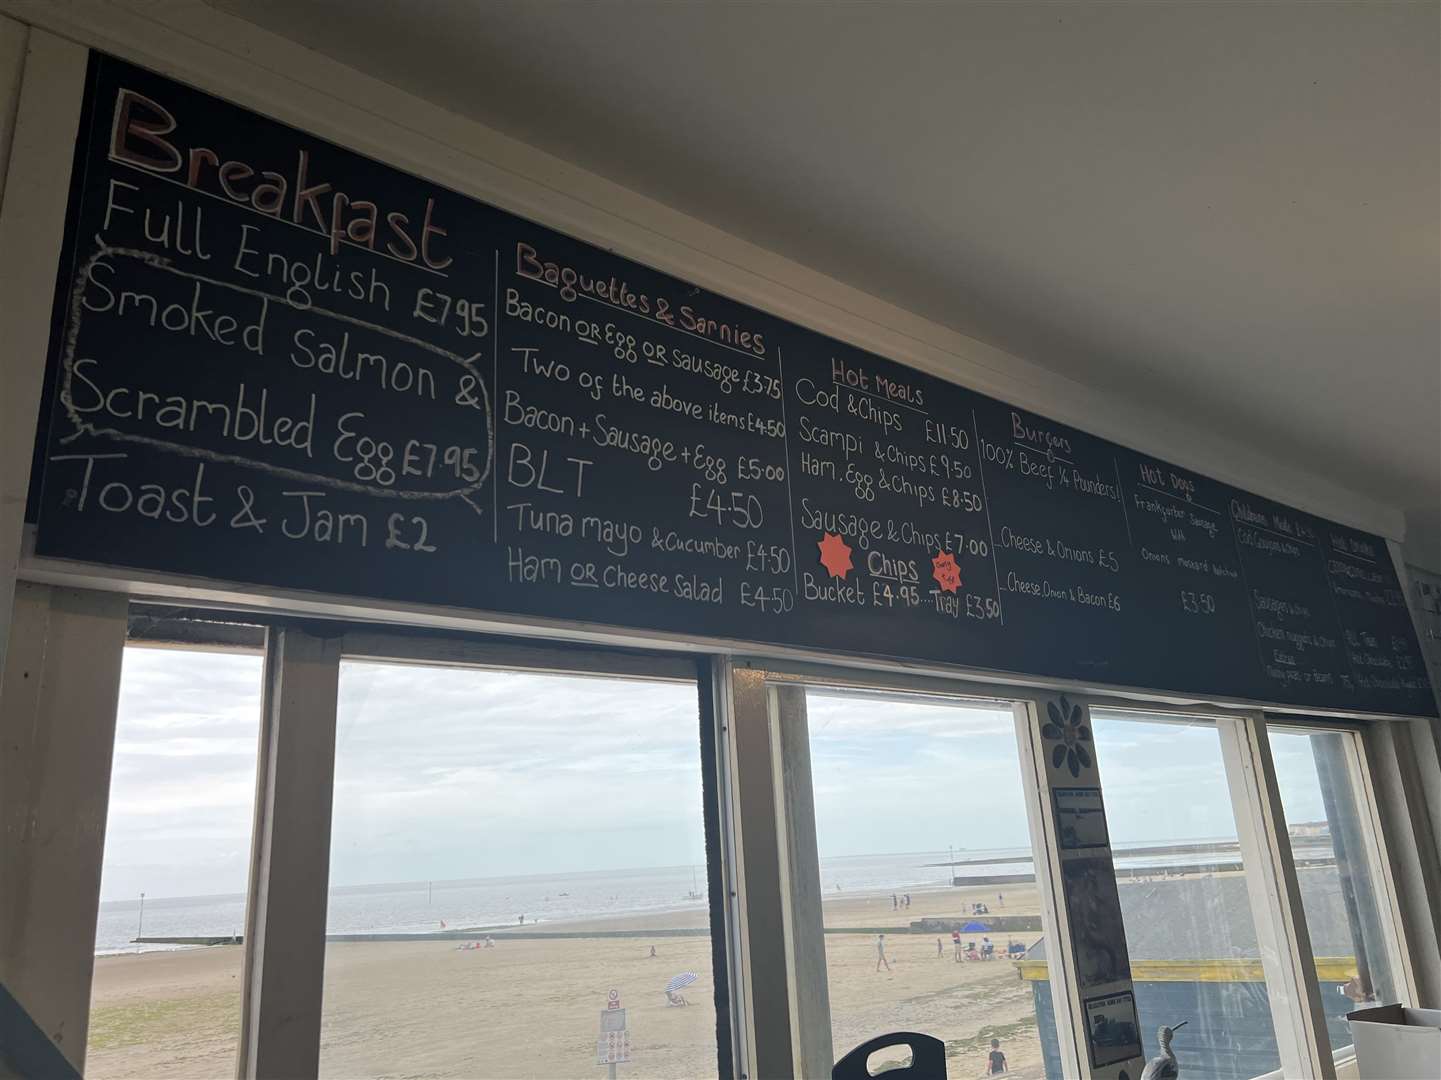 Take your pick from the menu - or just enjoy the view